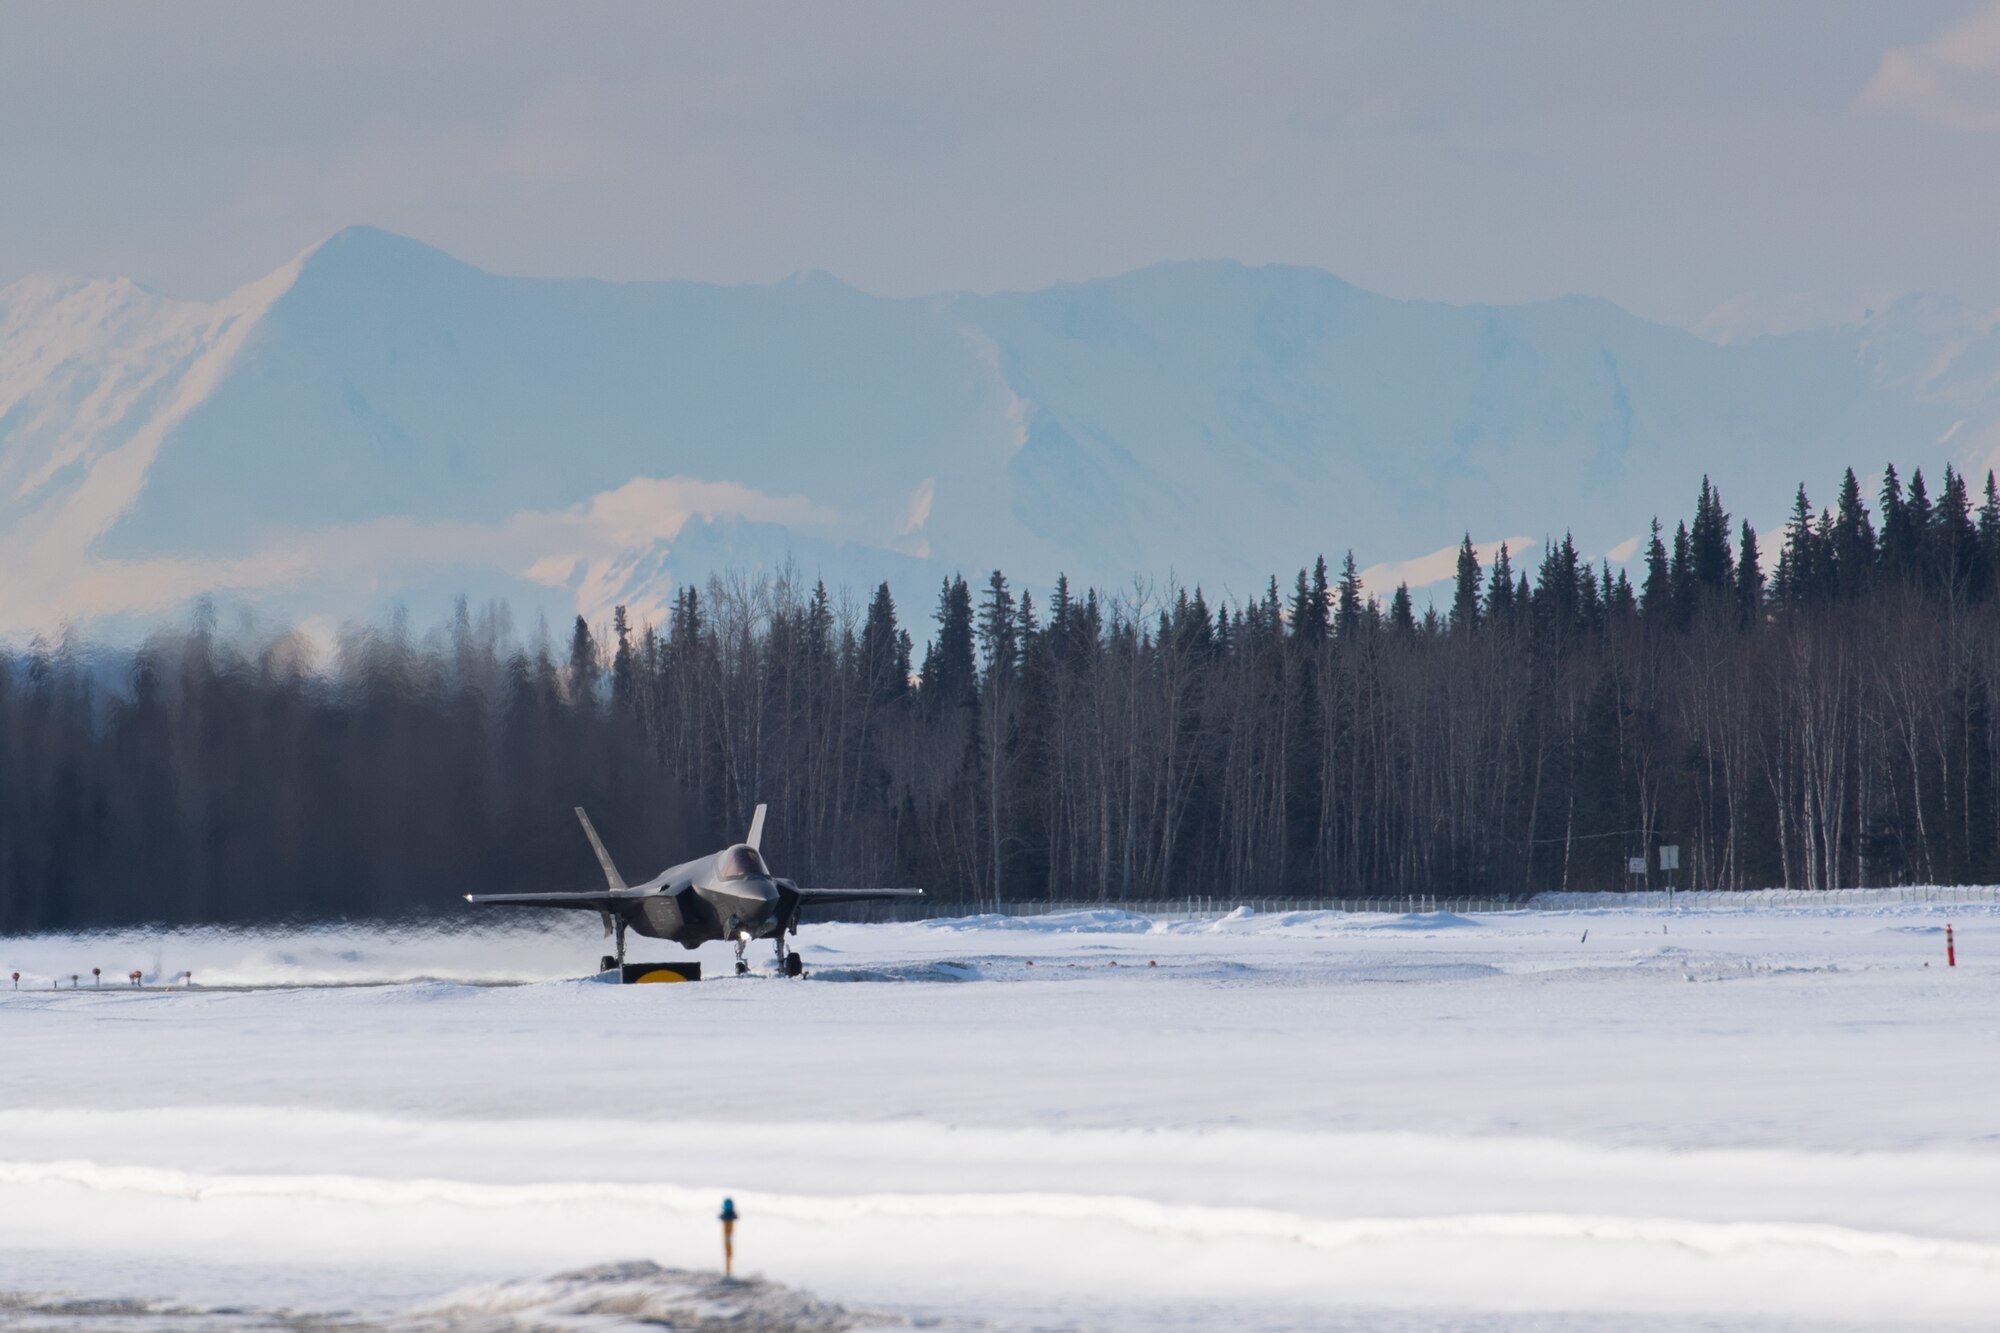 A U.S. Air Force F-35 Lightning II assigned to the 356th Fighter Squadron prepares to take off at Eielson Air Force Base, Alaska during exercise Arctic Gold 23-2, April 19, 2023. Arctic Gold 23-2, a continuation of AG 23-1, helped to refine and train the wing’s Agile Combat Employment capabilities to conduct fighter operations from multiple locations while testing command and control capabilities. (U.S. Air Force photo by Airman 1st Class Ricardo Sandoval)